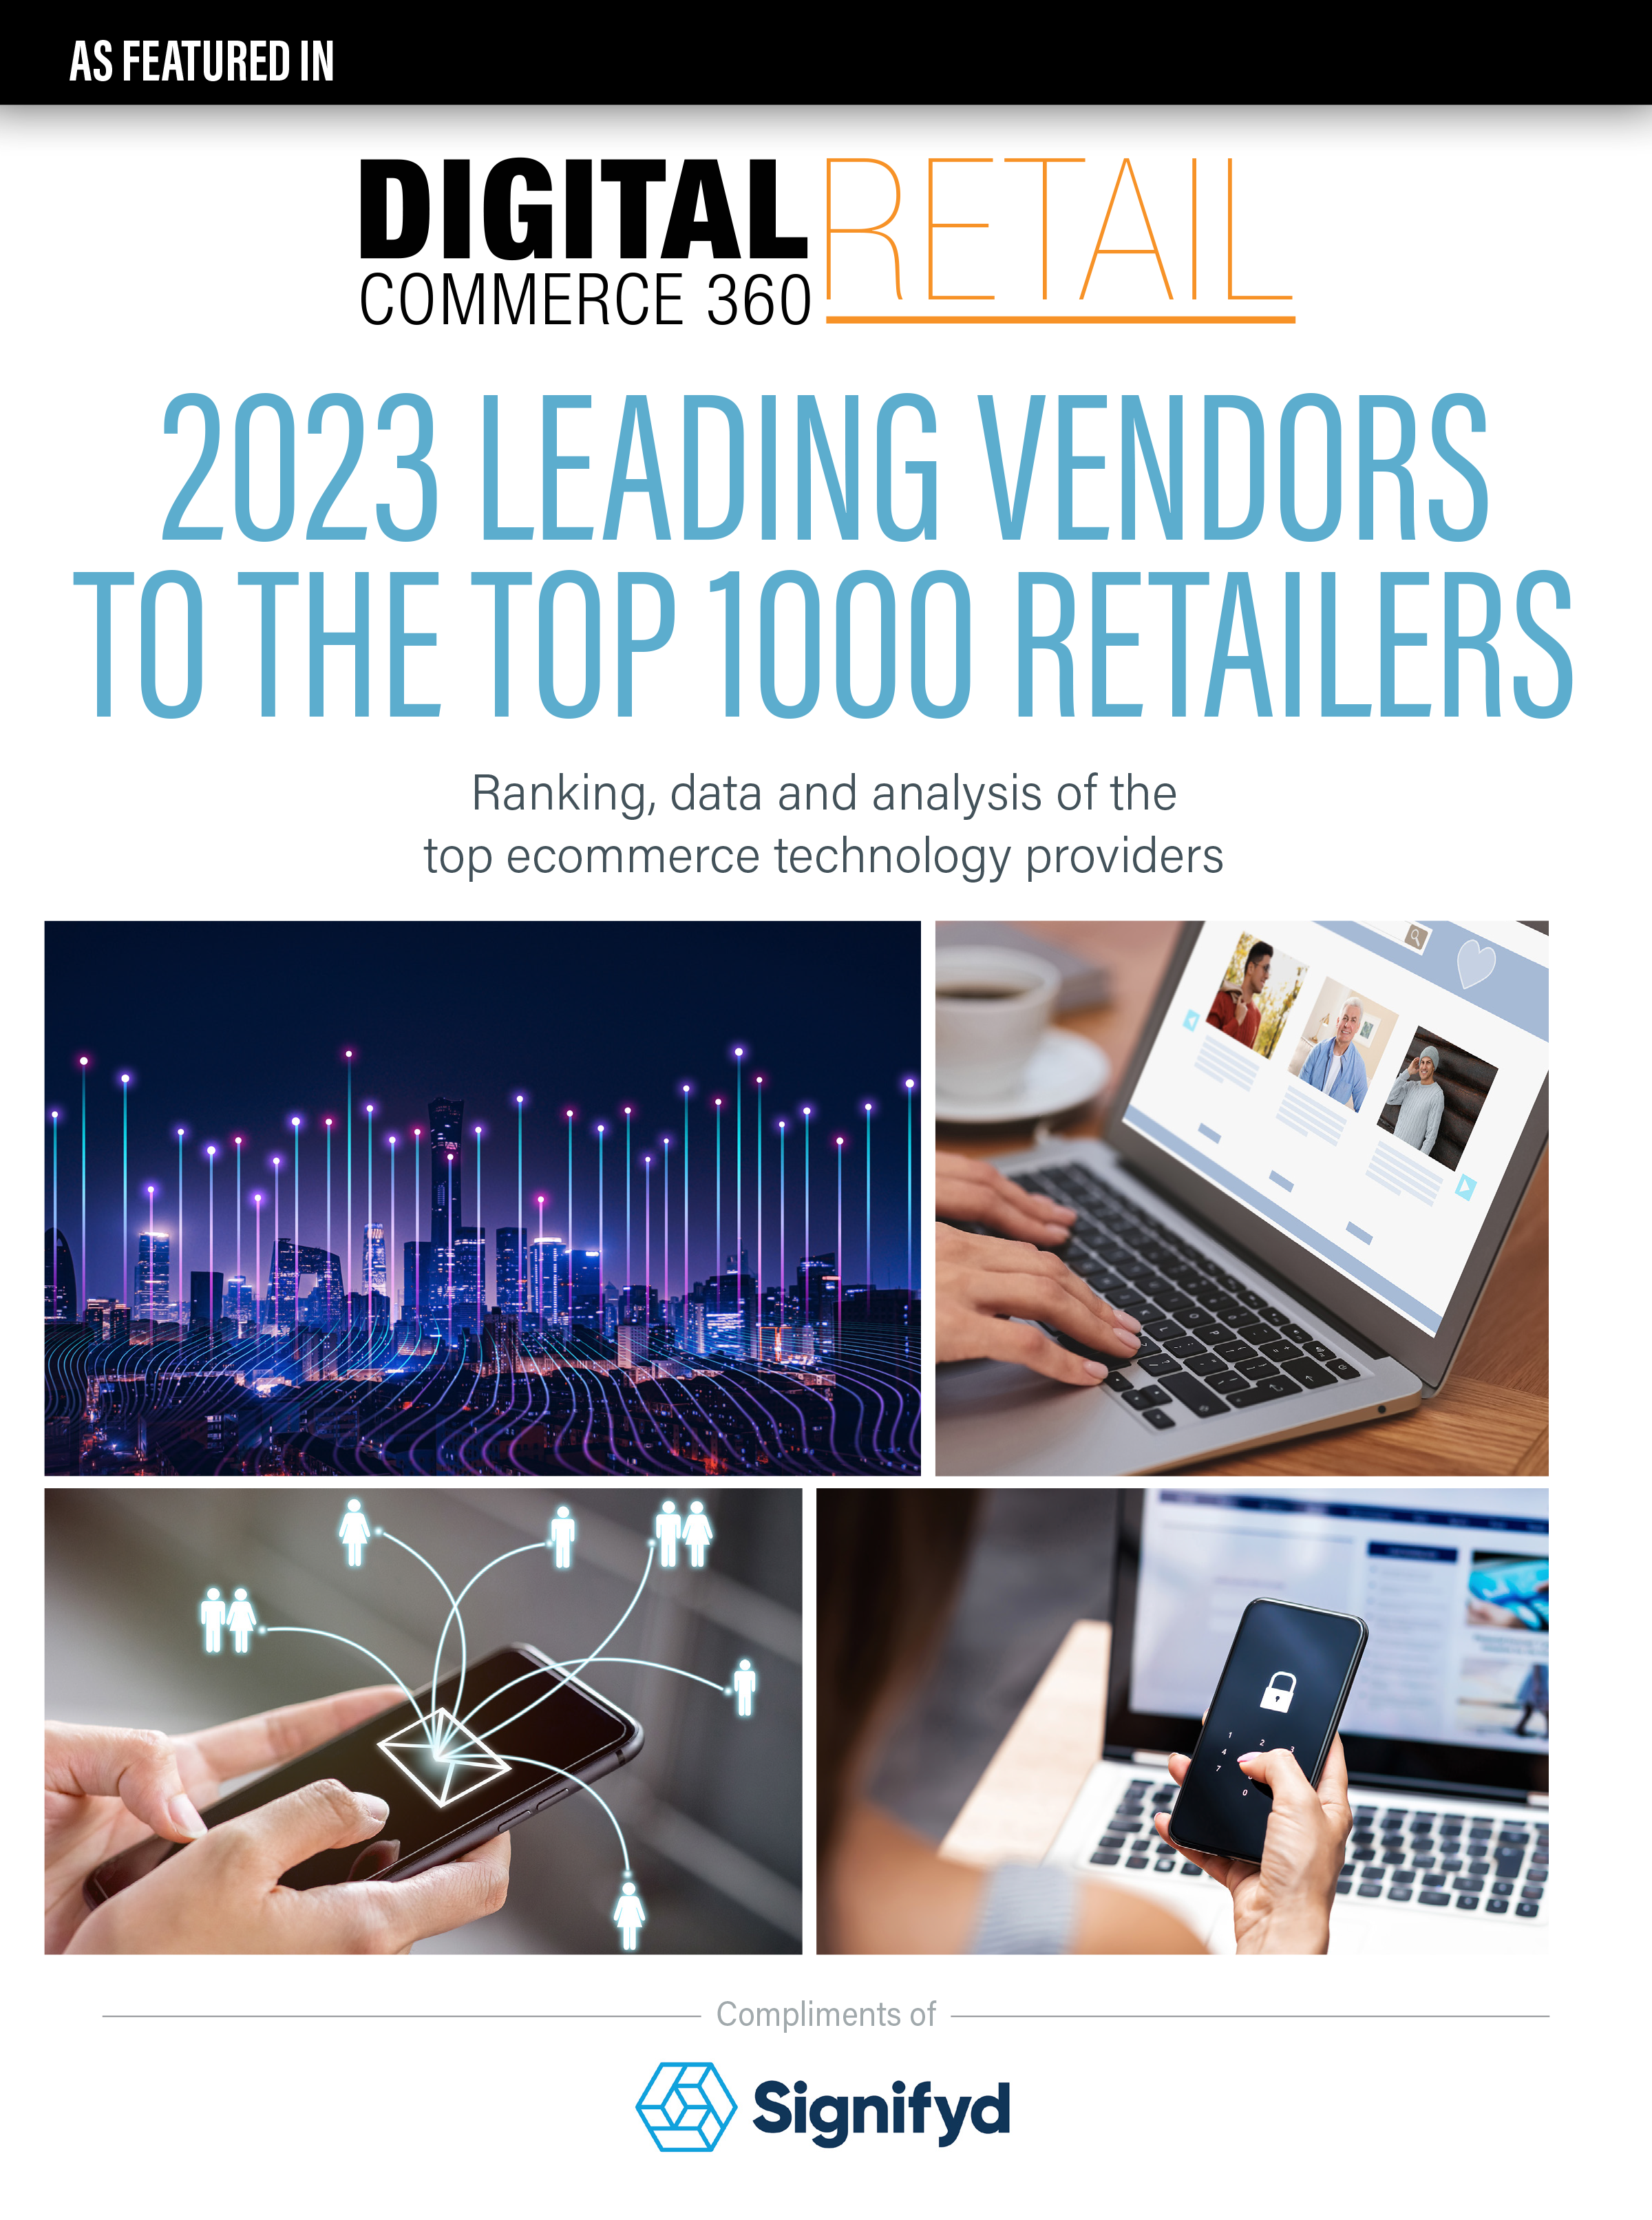 2023 Leading Vendors to the Top 1000 Retailers